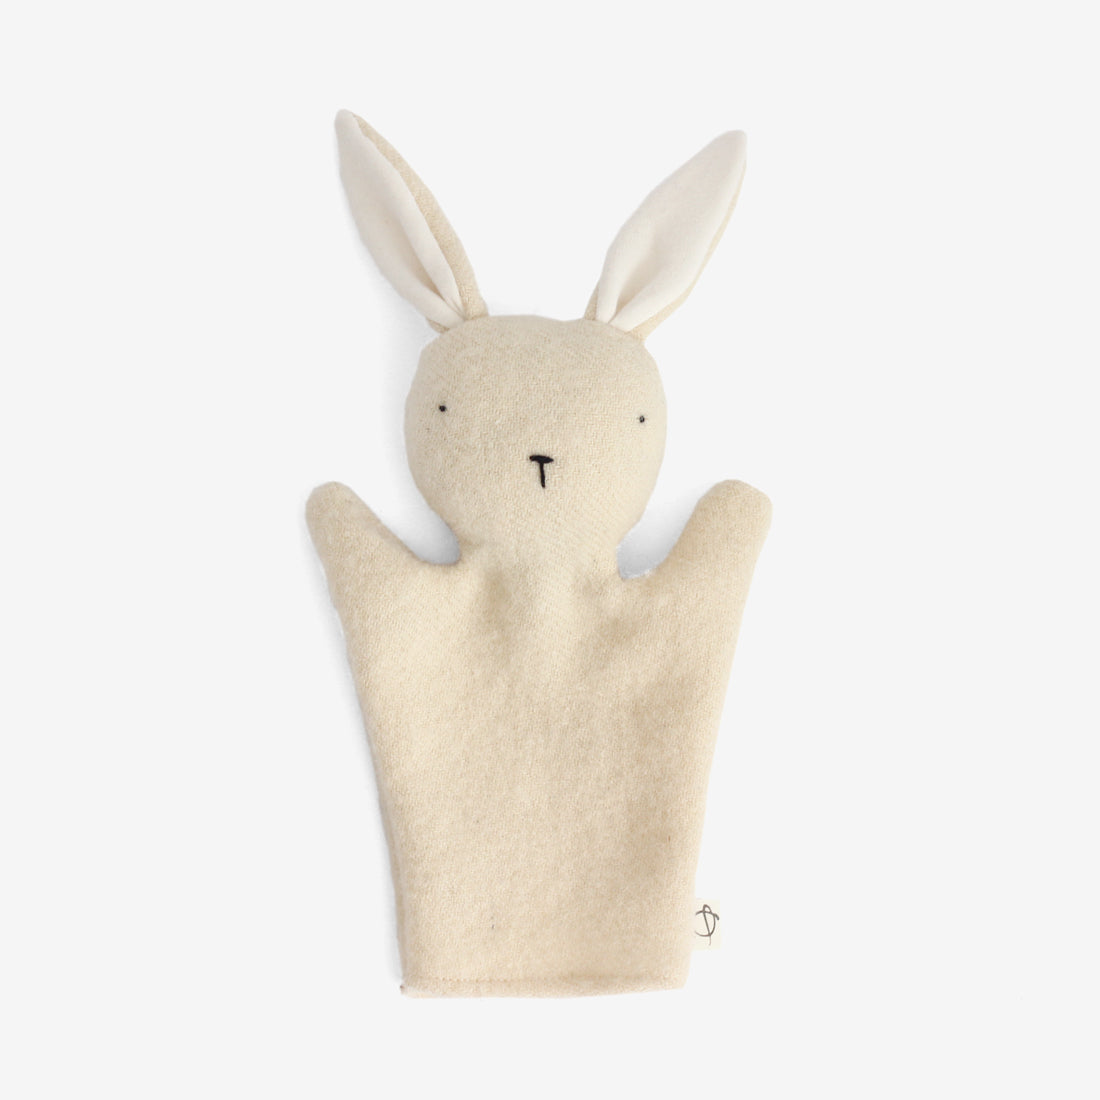 Handmade Upcycled Wool Bunny Puppet - White